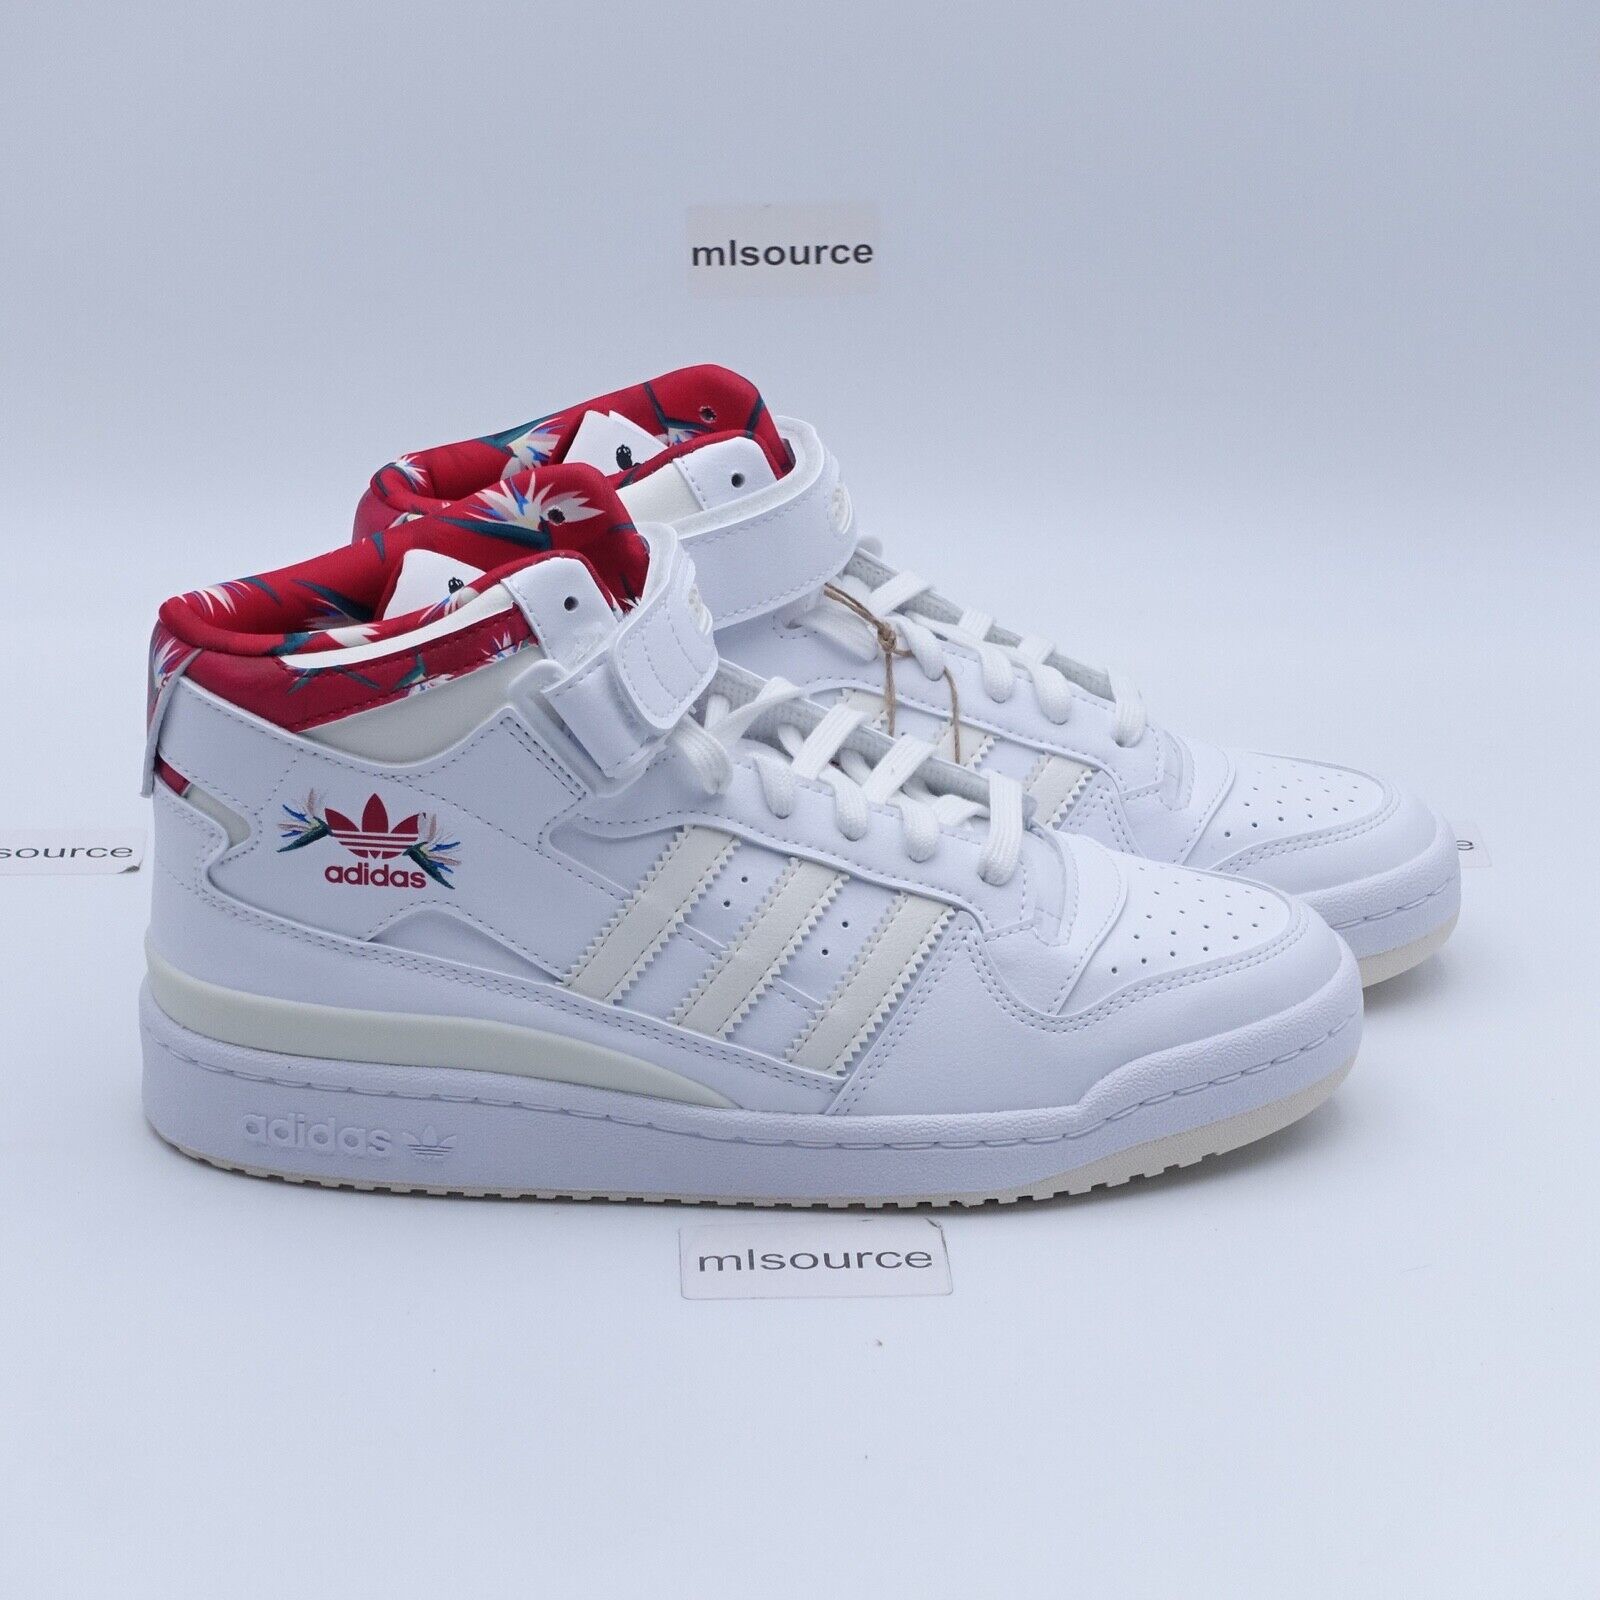 Size 8 Women's adidas Originals Forum Mid Thebe Magugu Sneakers GY9556  White | eBay